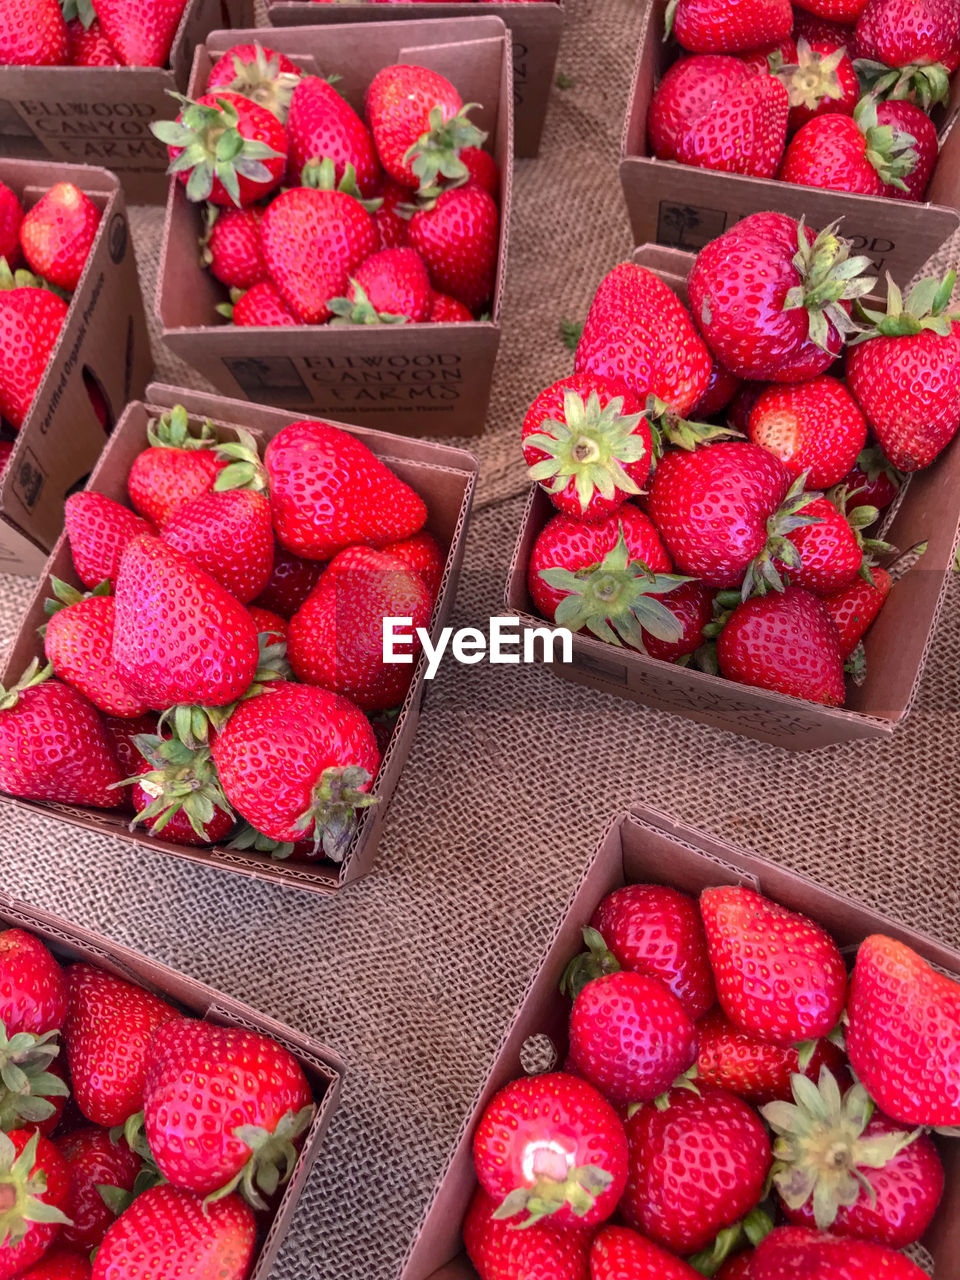 HIGH ANGLE VIEW OF STRAWBERRIES IN CONTAINER